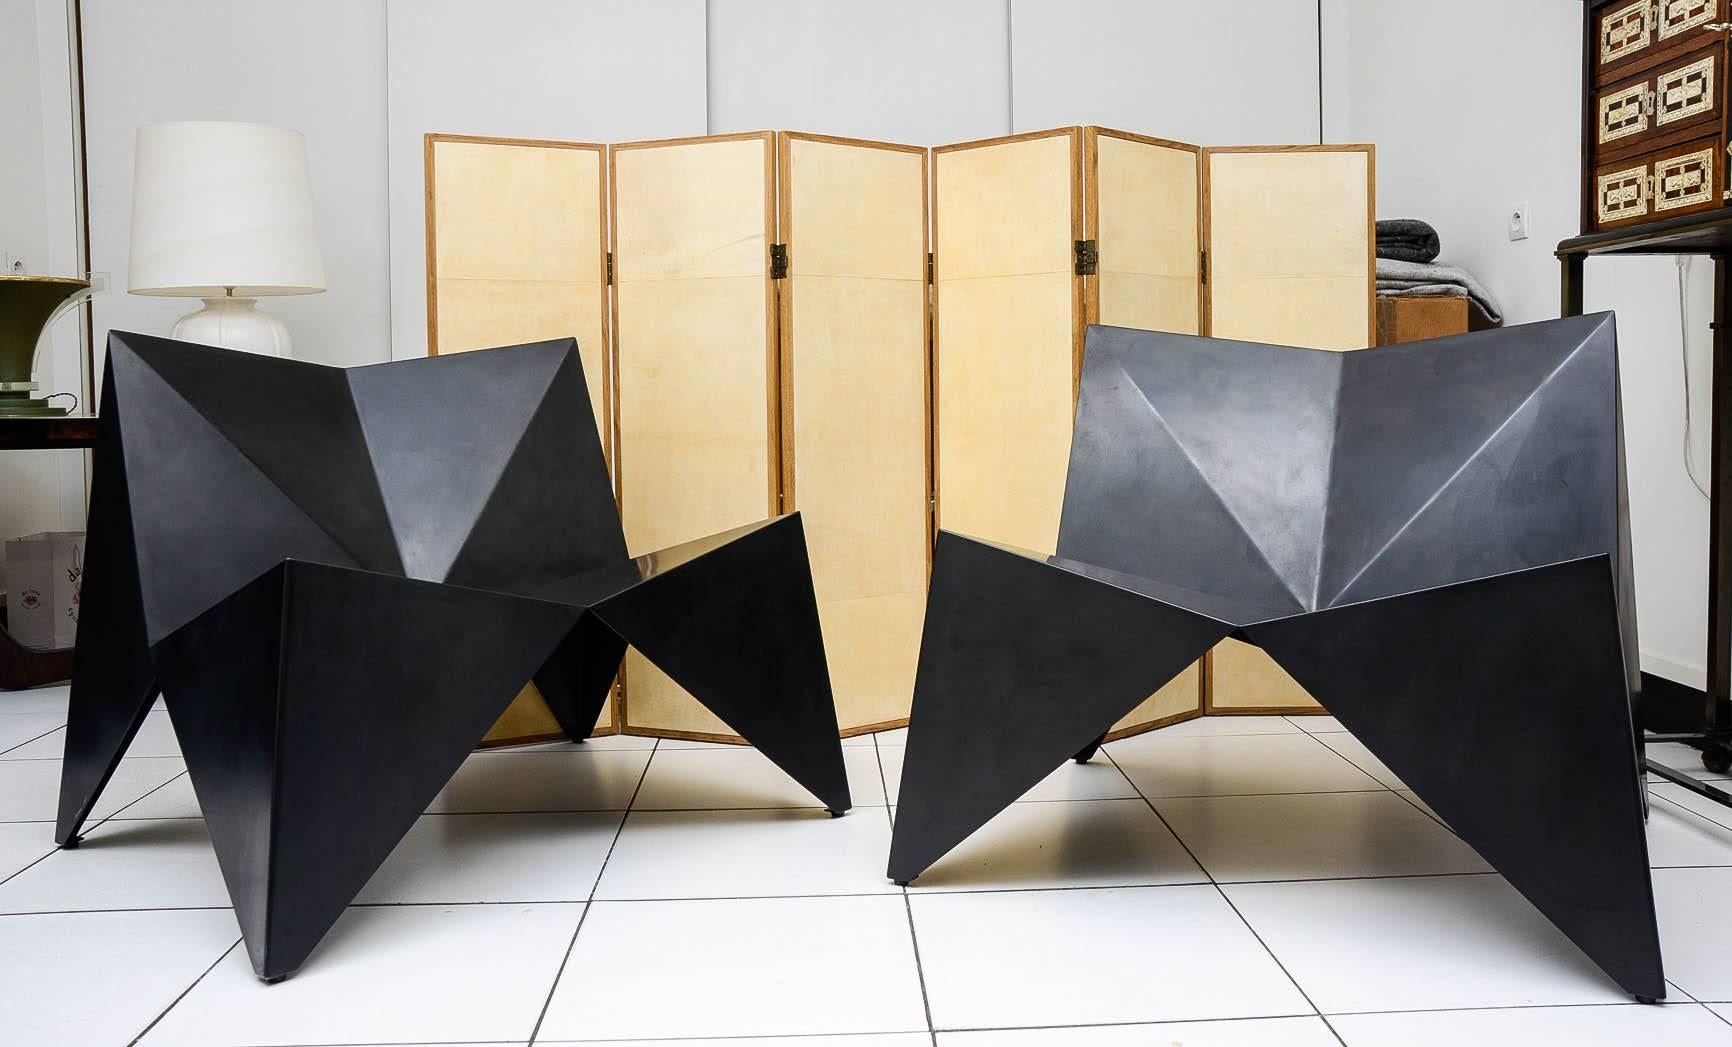 Harry, pair of armchairs, geometrical design, in oxidized steel and black patina, by Stéphane Ducatteau, 2015.
This line is an exclusive creation for our gallery. Each piece is signed and numbered. (50 ex edition)